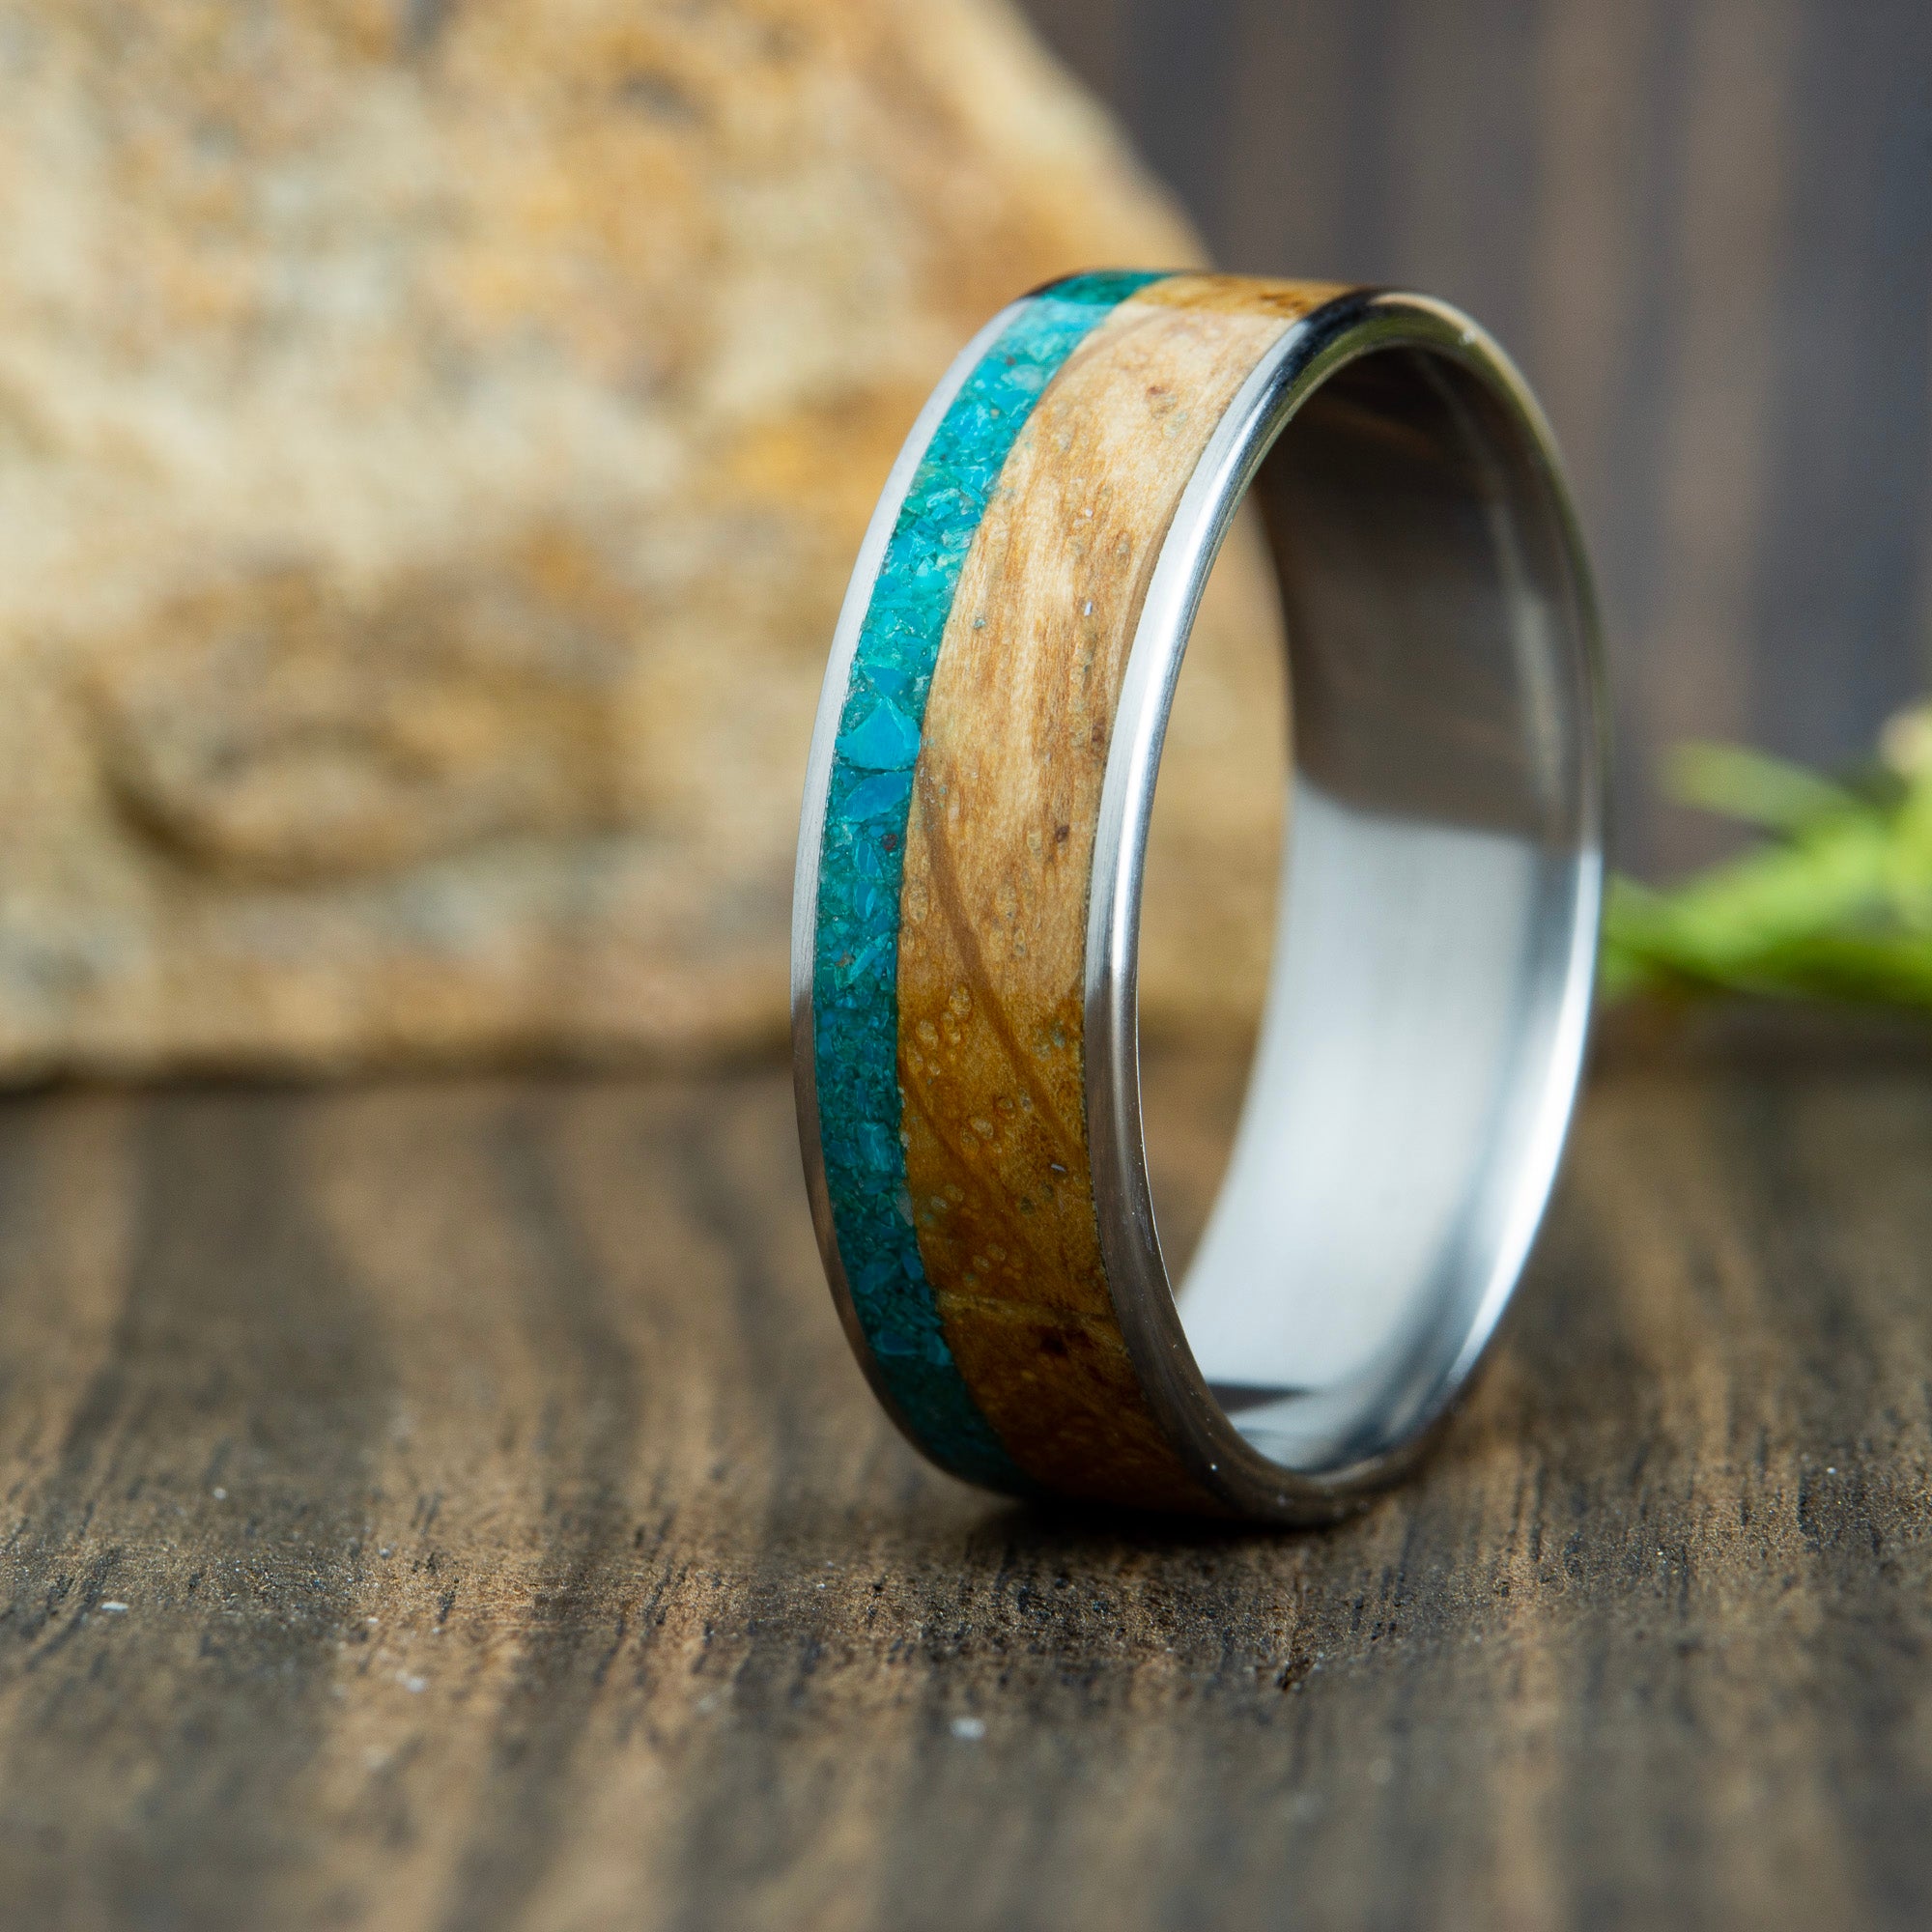 Mens wedding band with whiskey barrel wood and turquoise